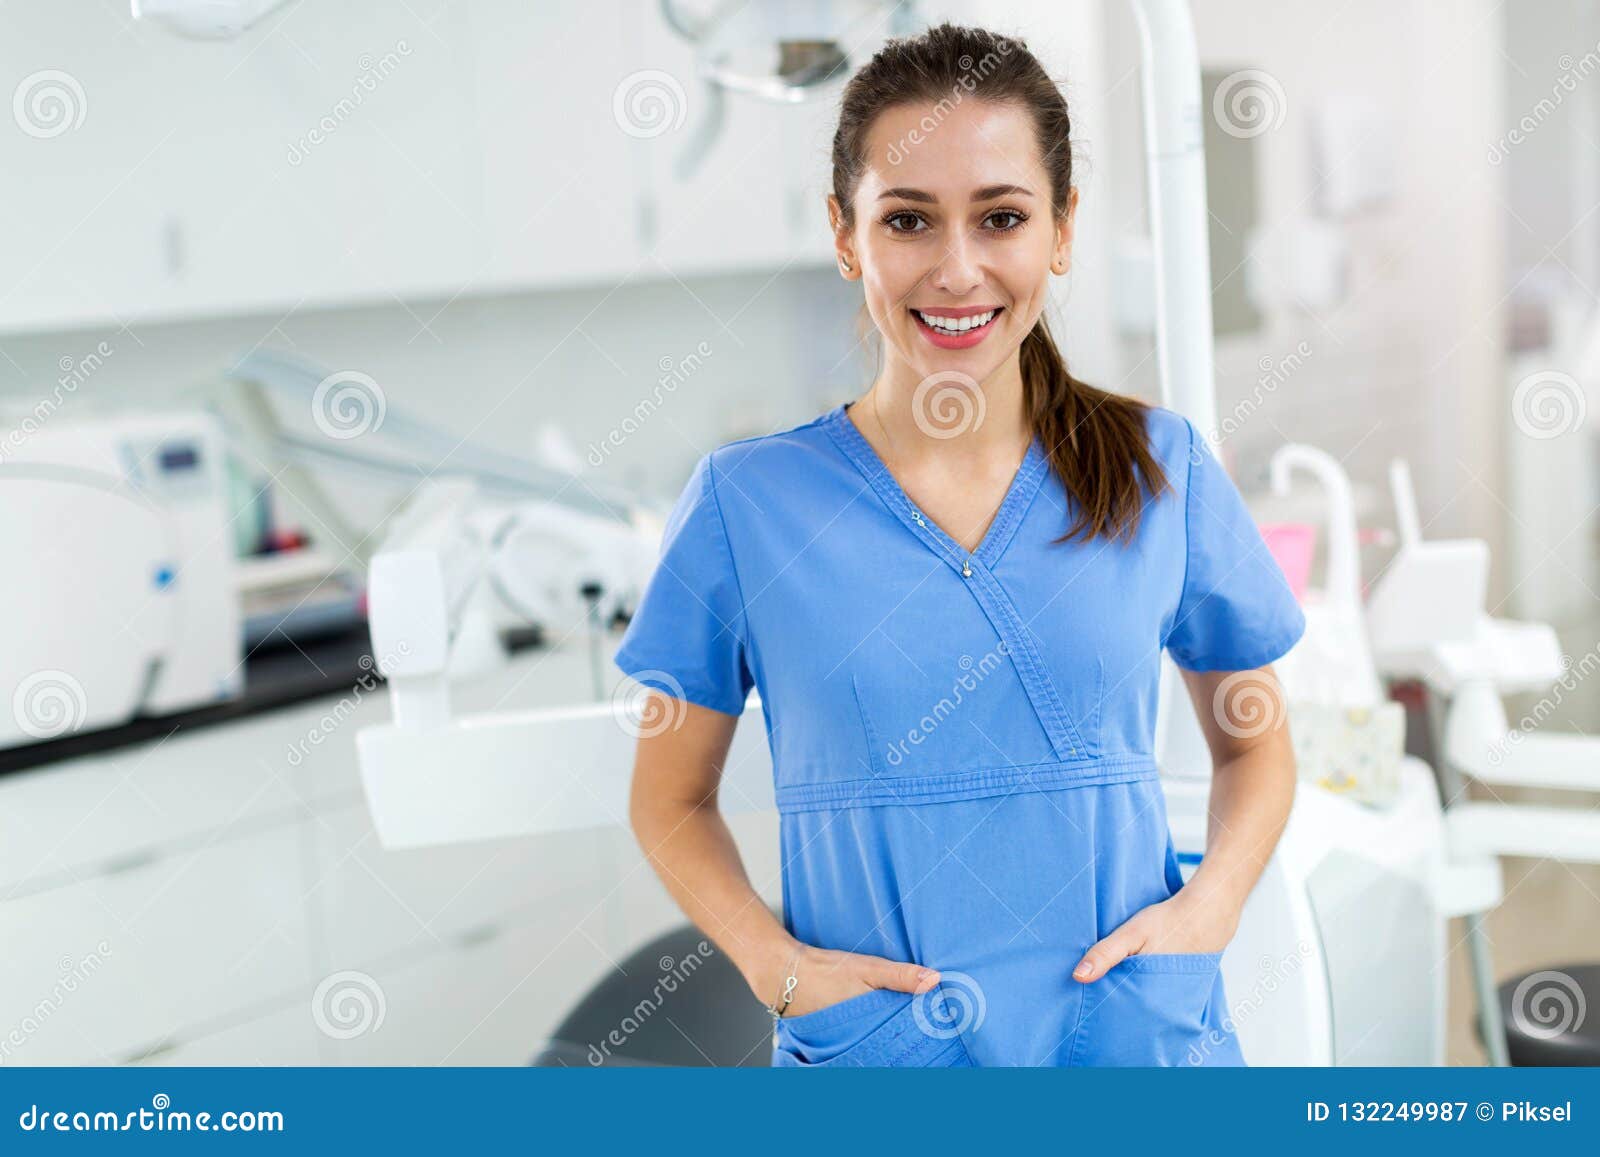 female dental assistant in office